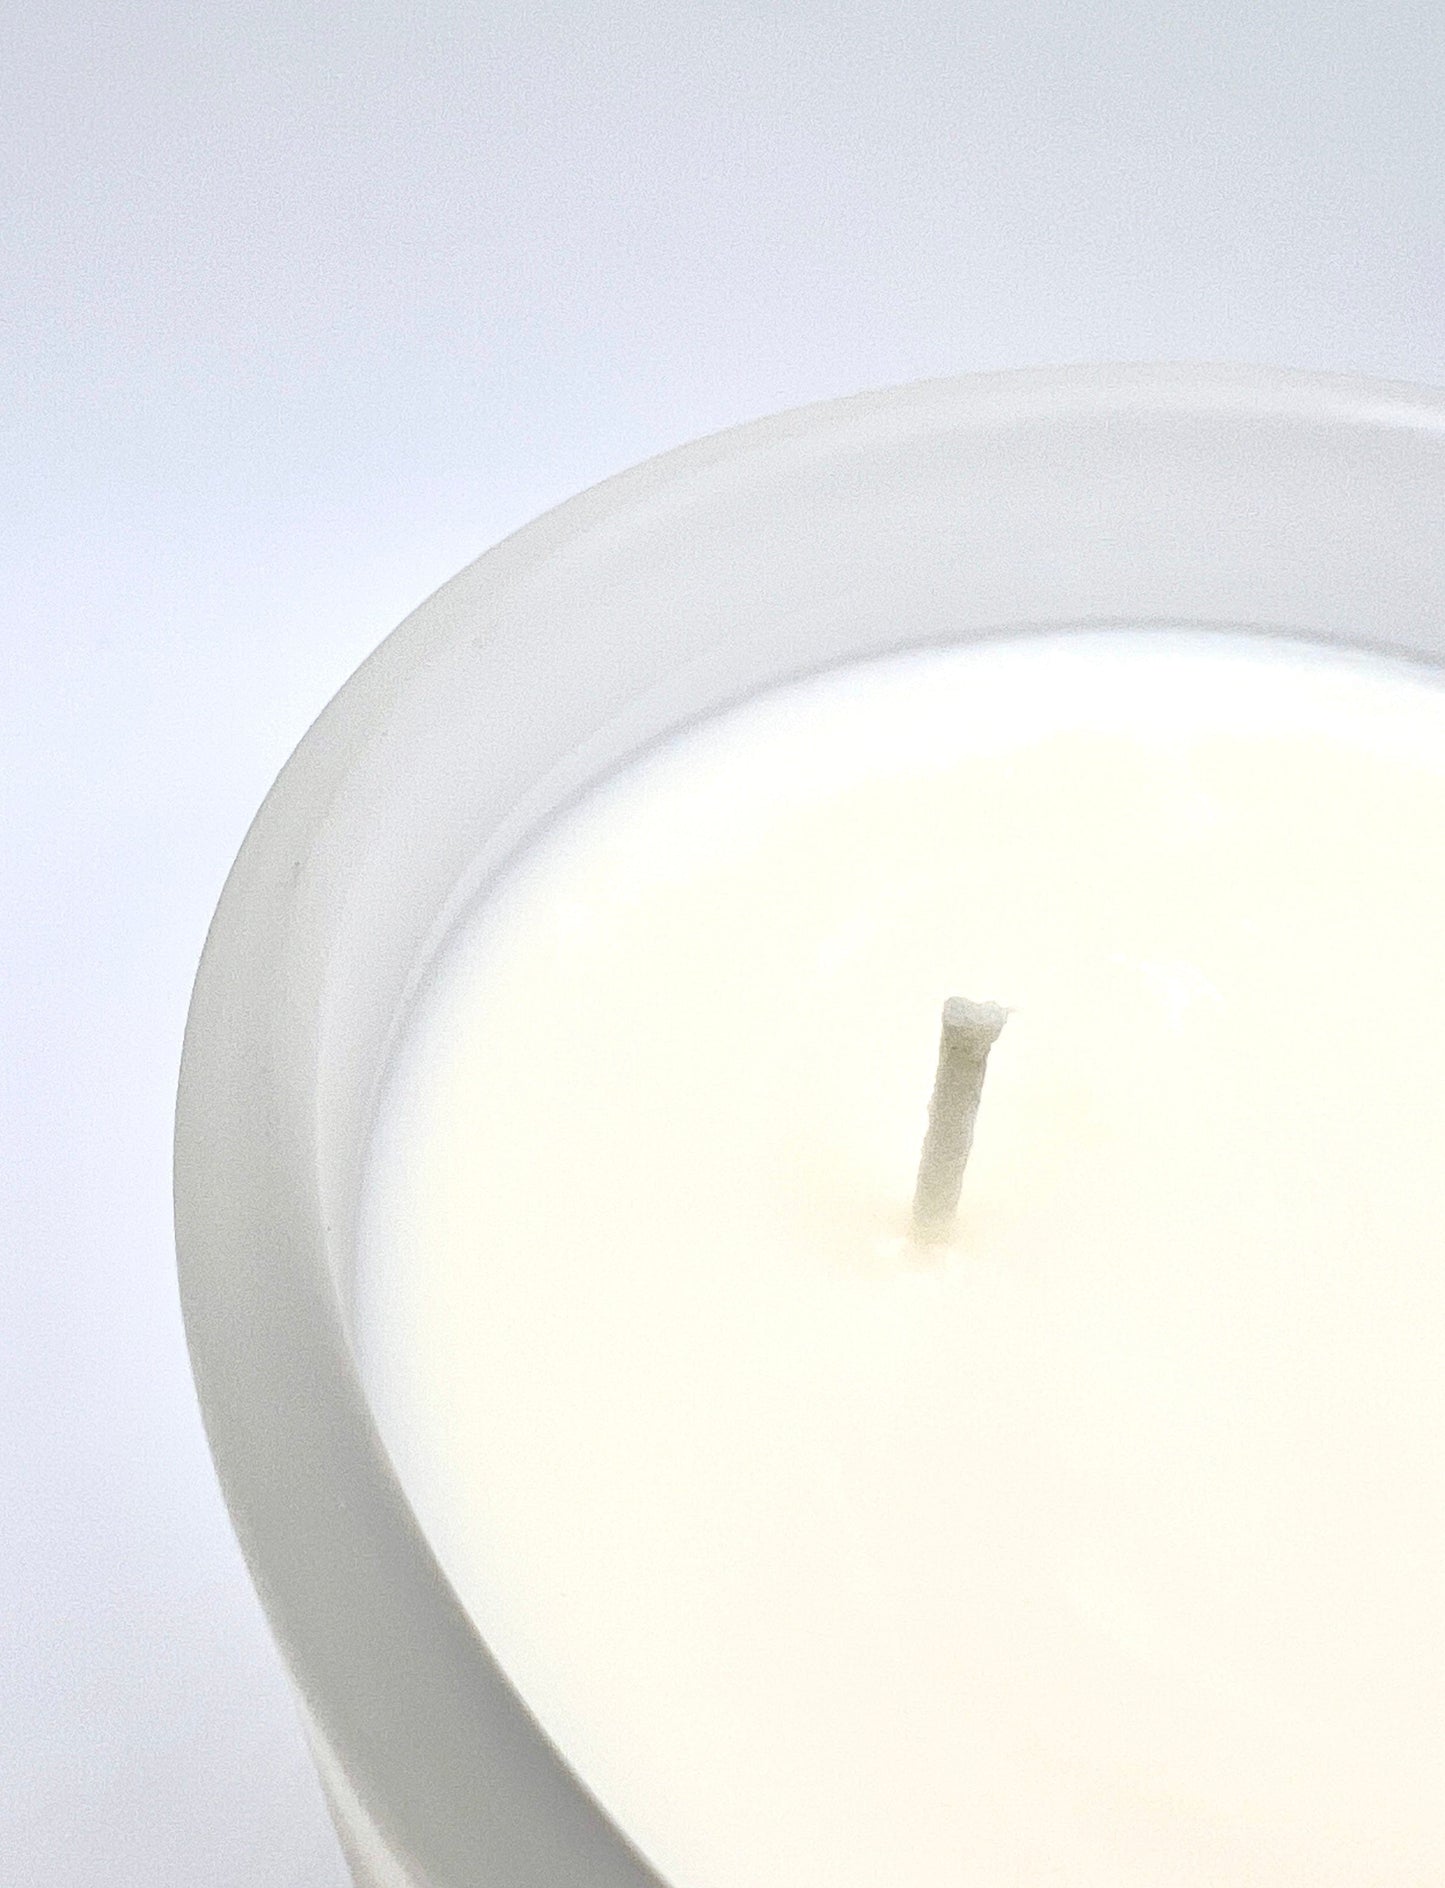 Can'tdles Candles 10oz Net Wt Jar Not Today, Satan: Grapefruit & Mangosteen Scented Candle